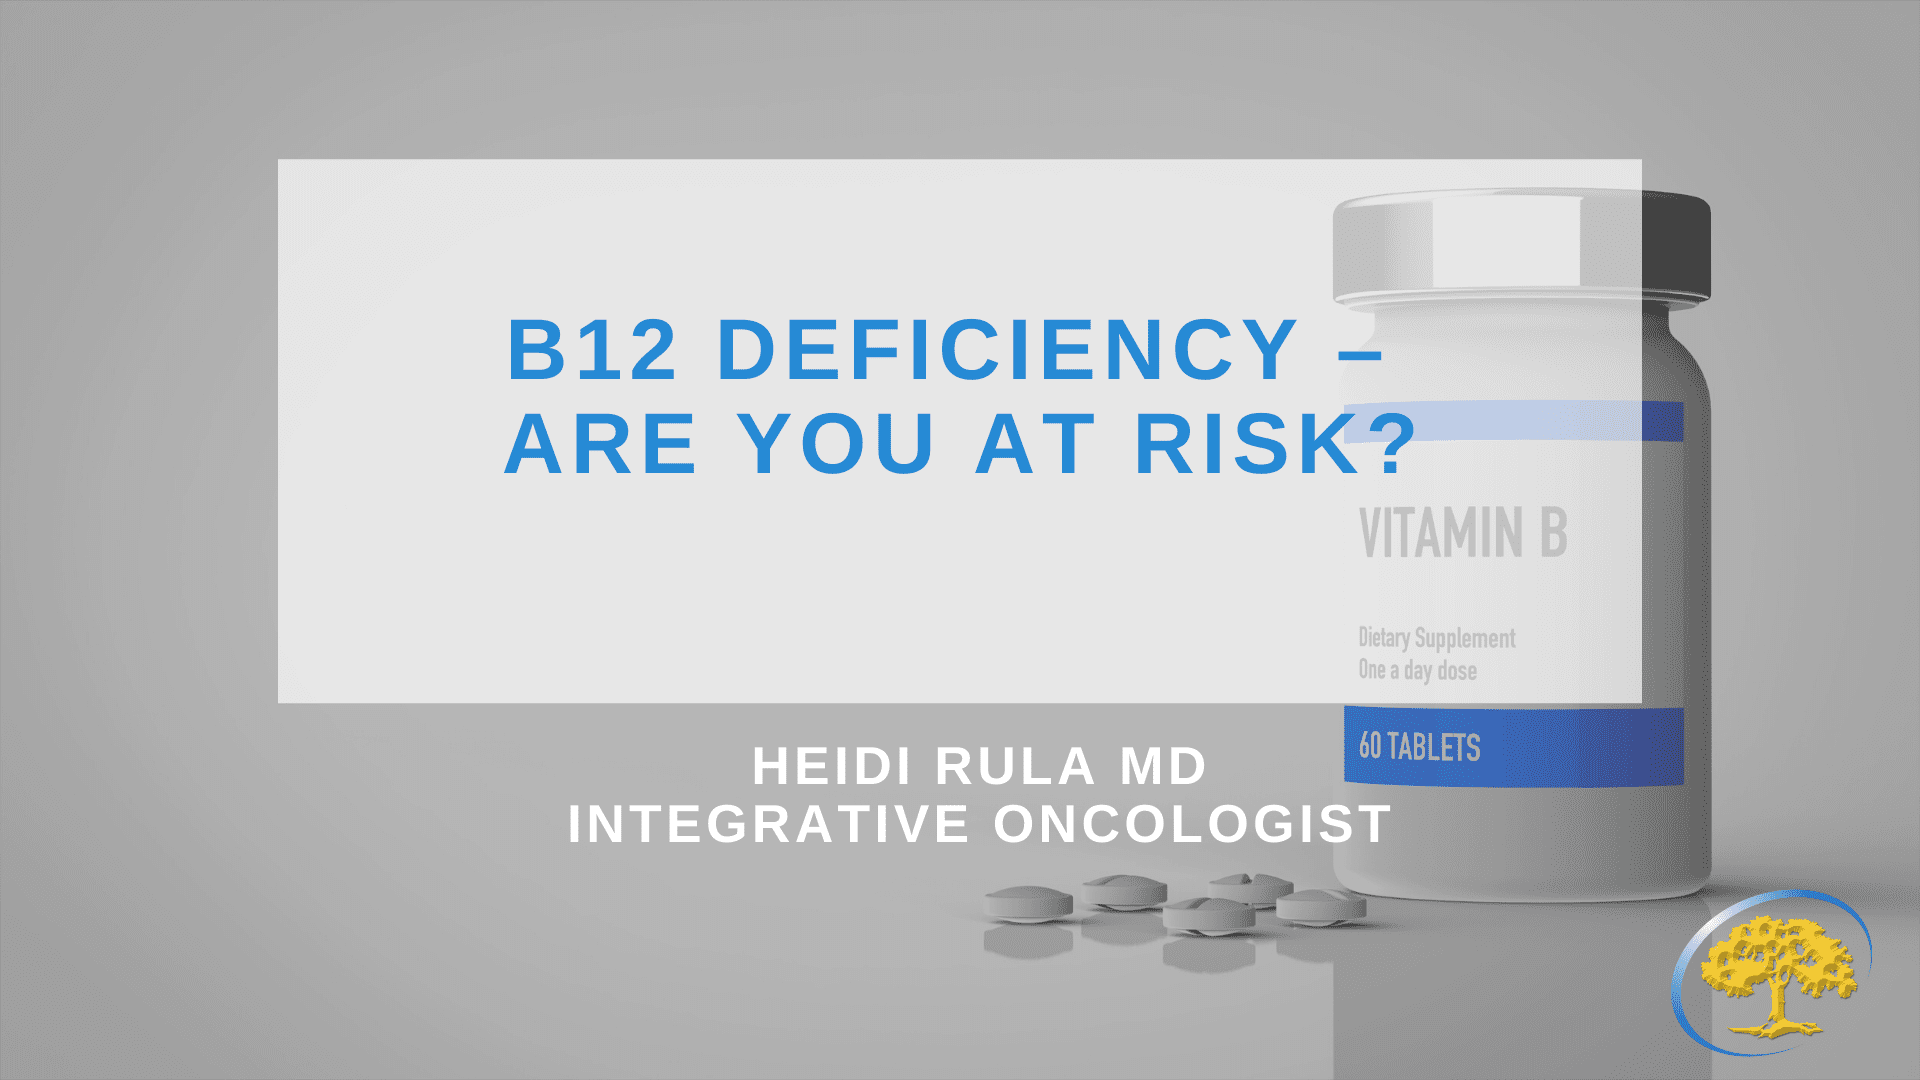 B12 Deficiency – Are you at risk? - Ironwood Cancer & Research Centers